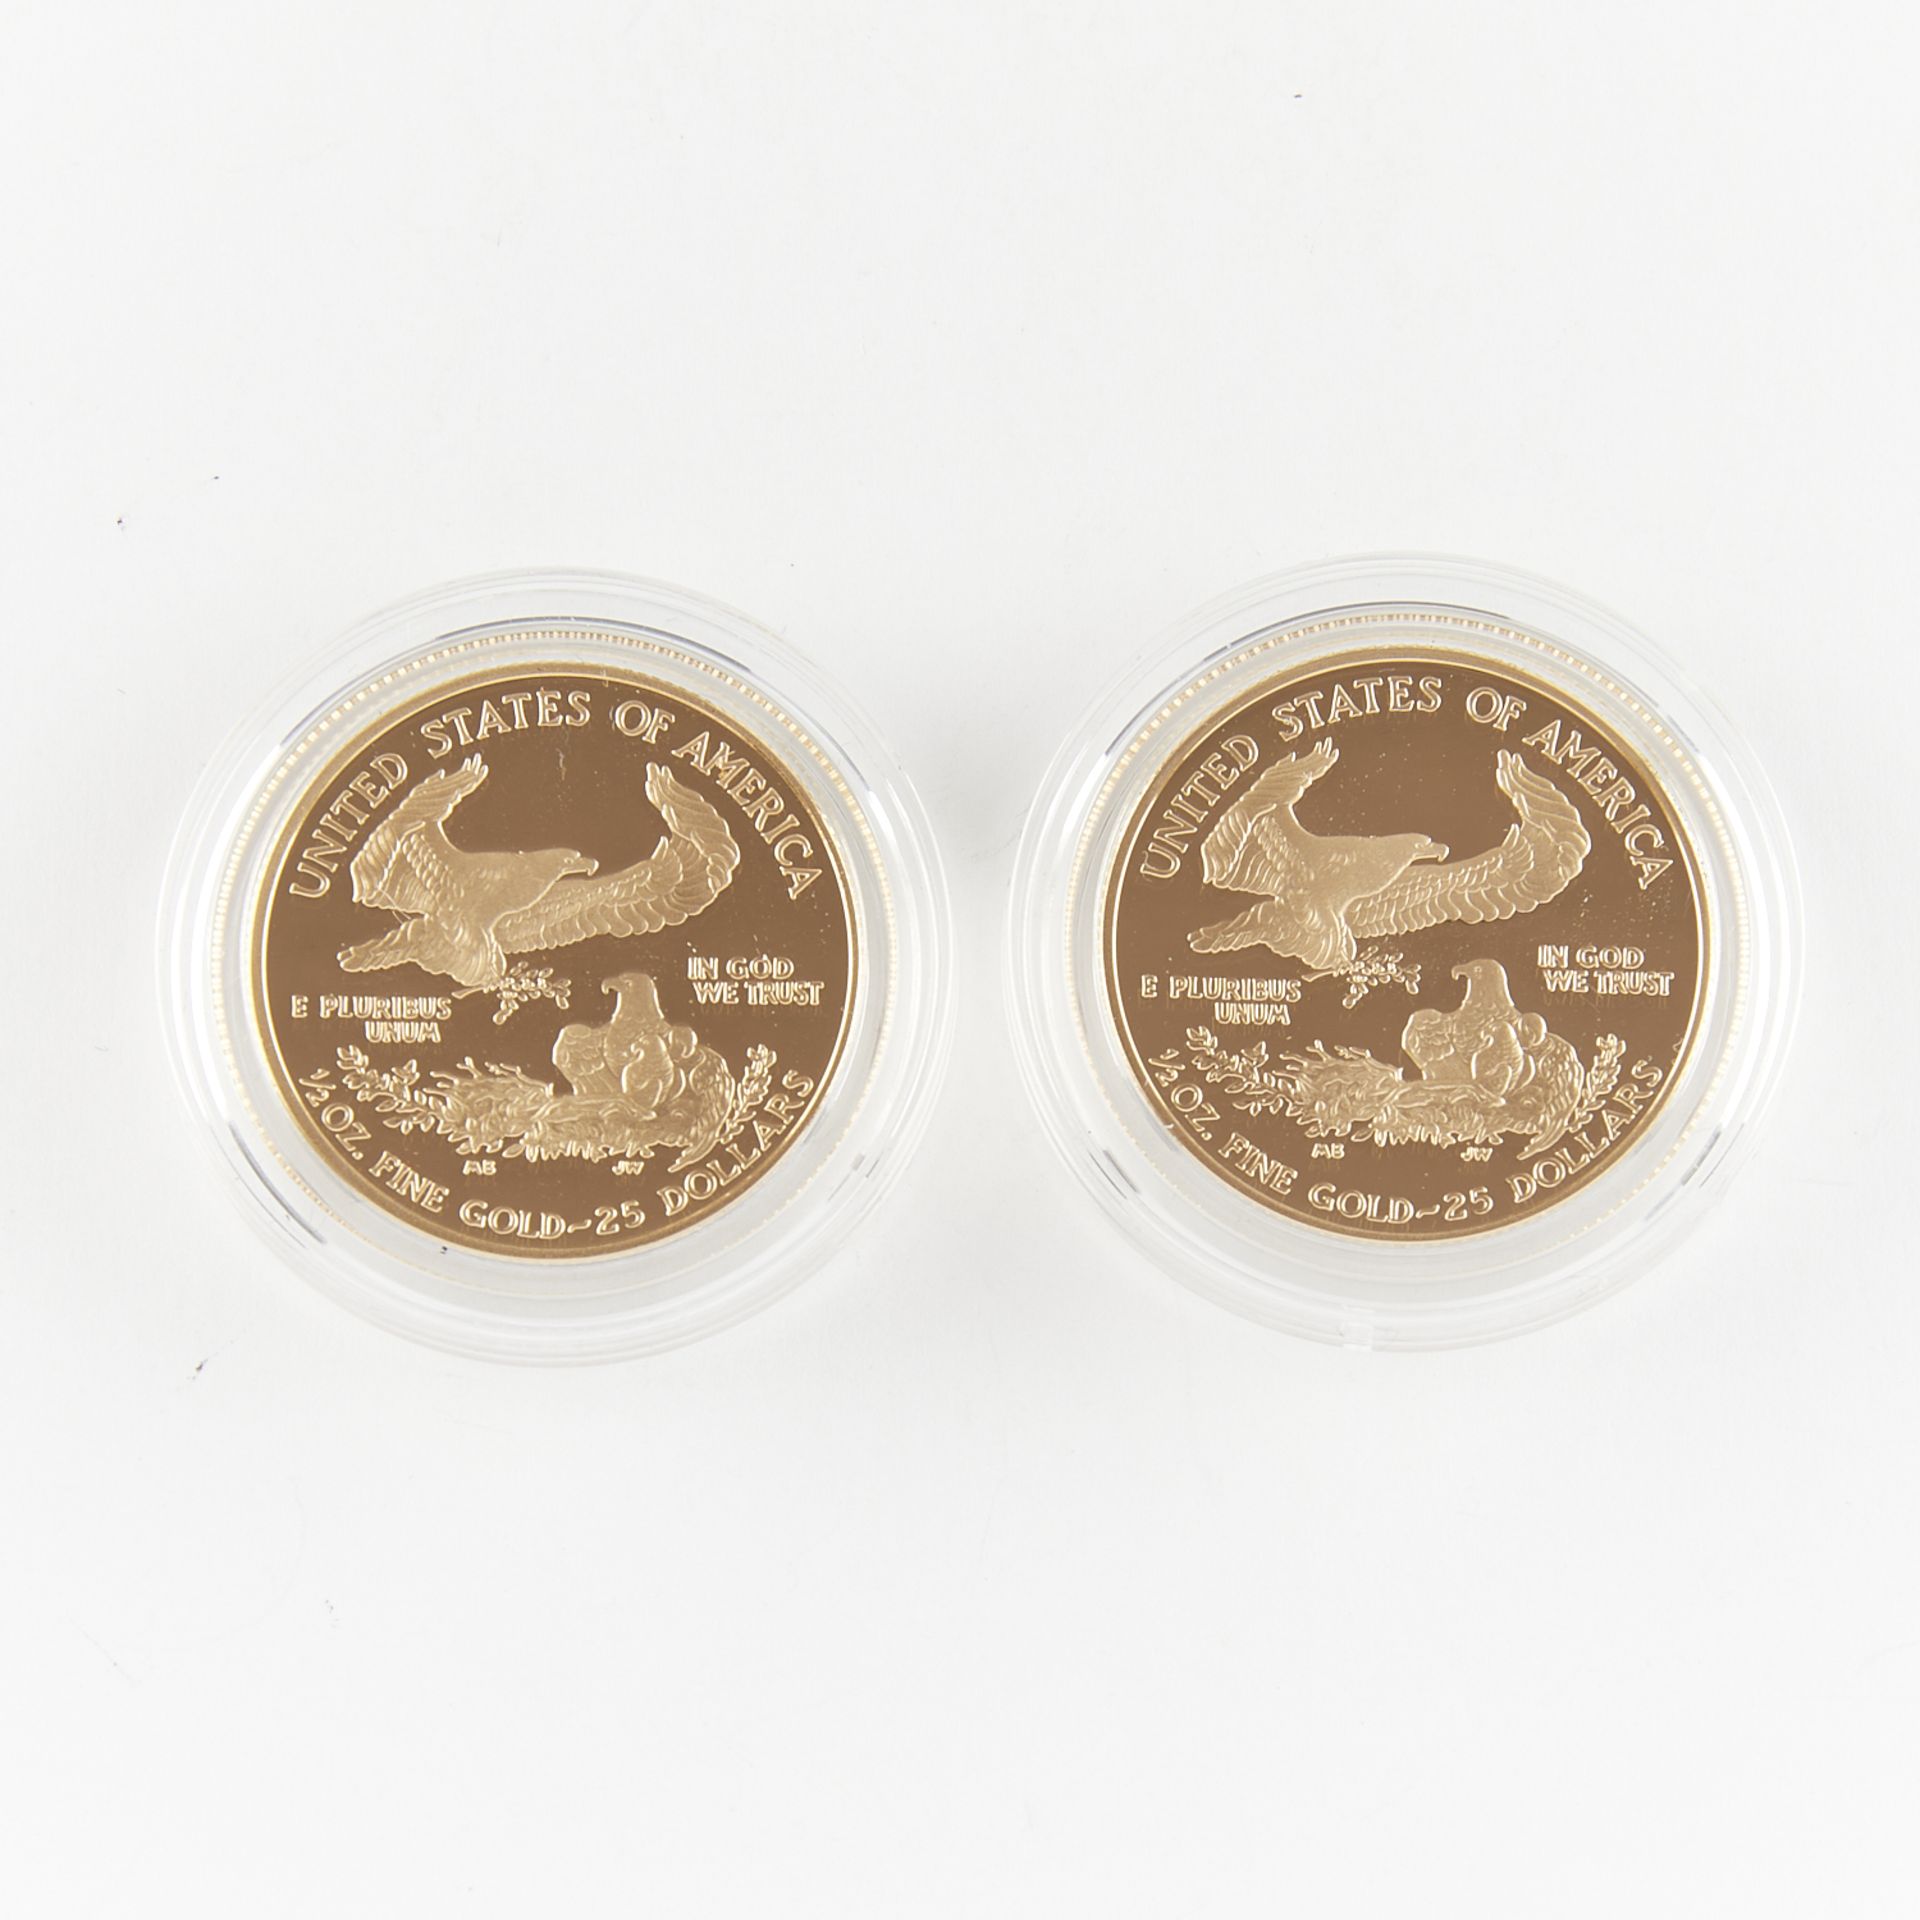 Group 2 $25 Gold American Eagle Proof Coins - Image 3 of 3